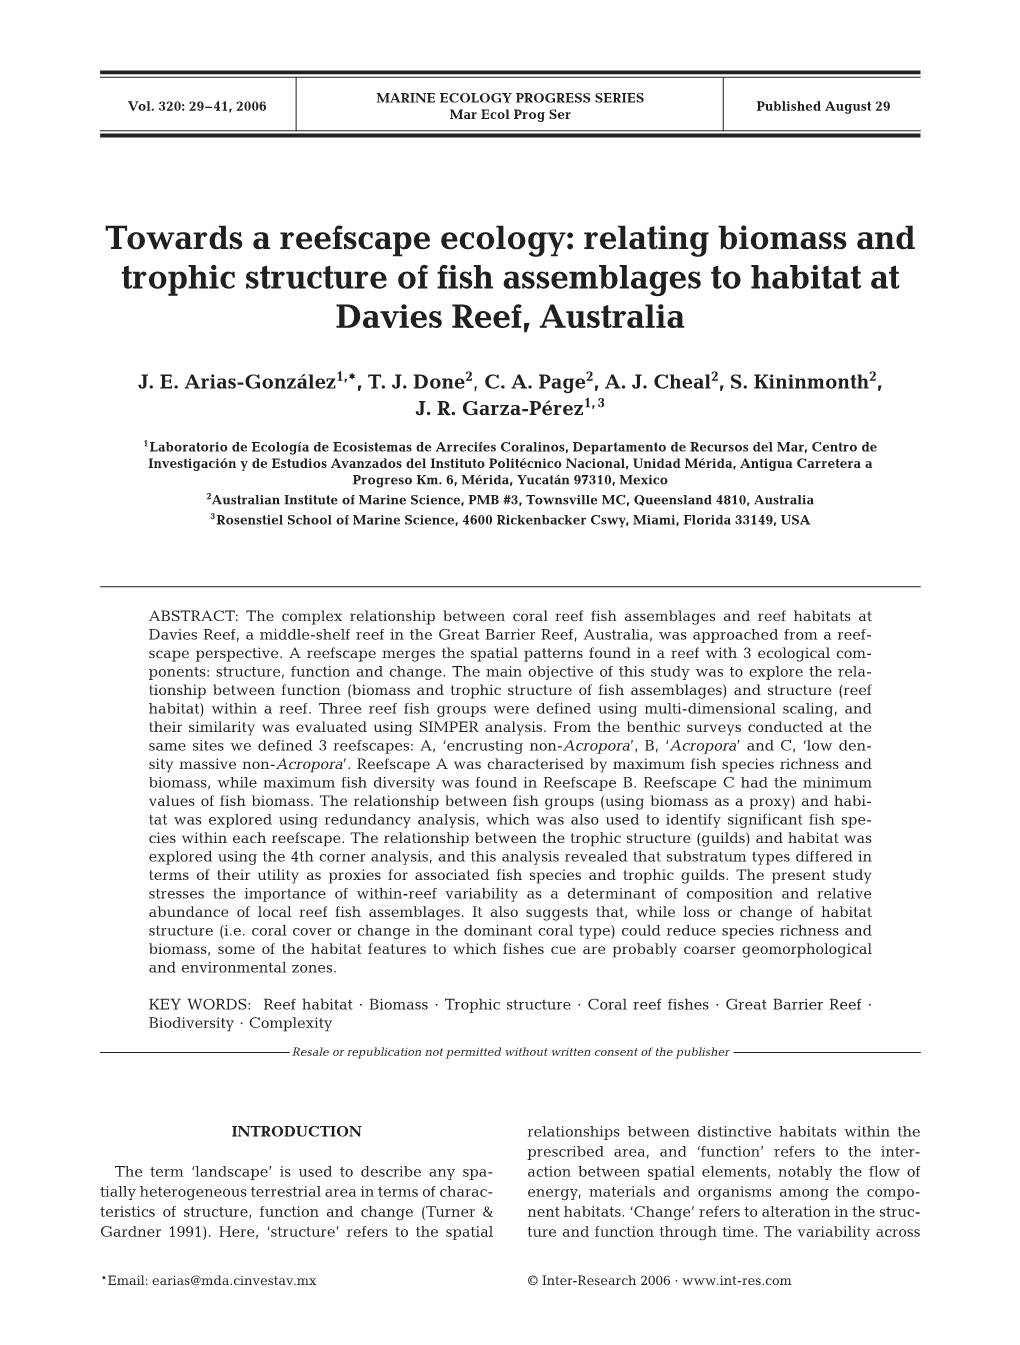 Towards a Reefscape Ecology: Relating Biomass and Trophic Structure of Fish Assemblages to Habitat at Davies Reef, Australia